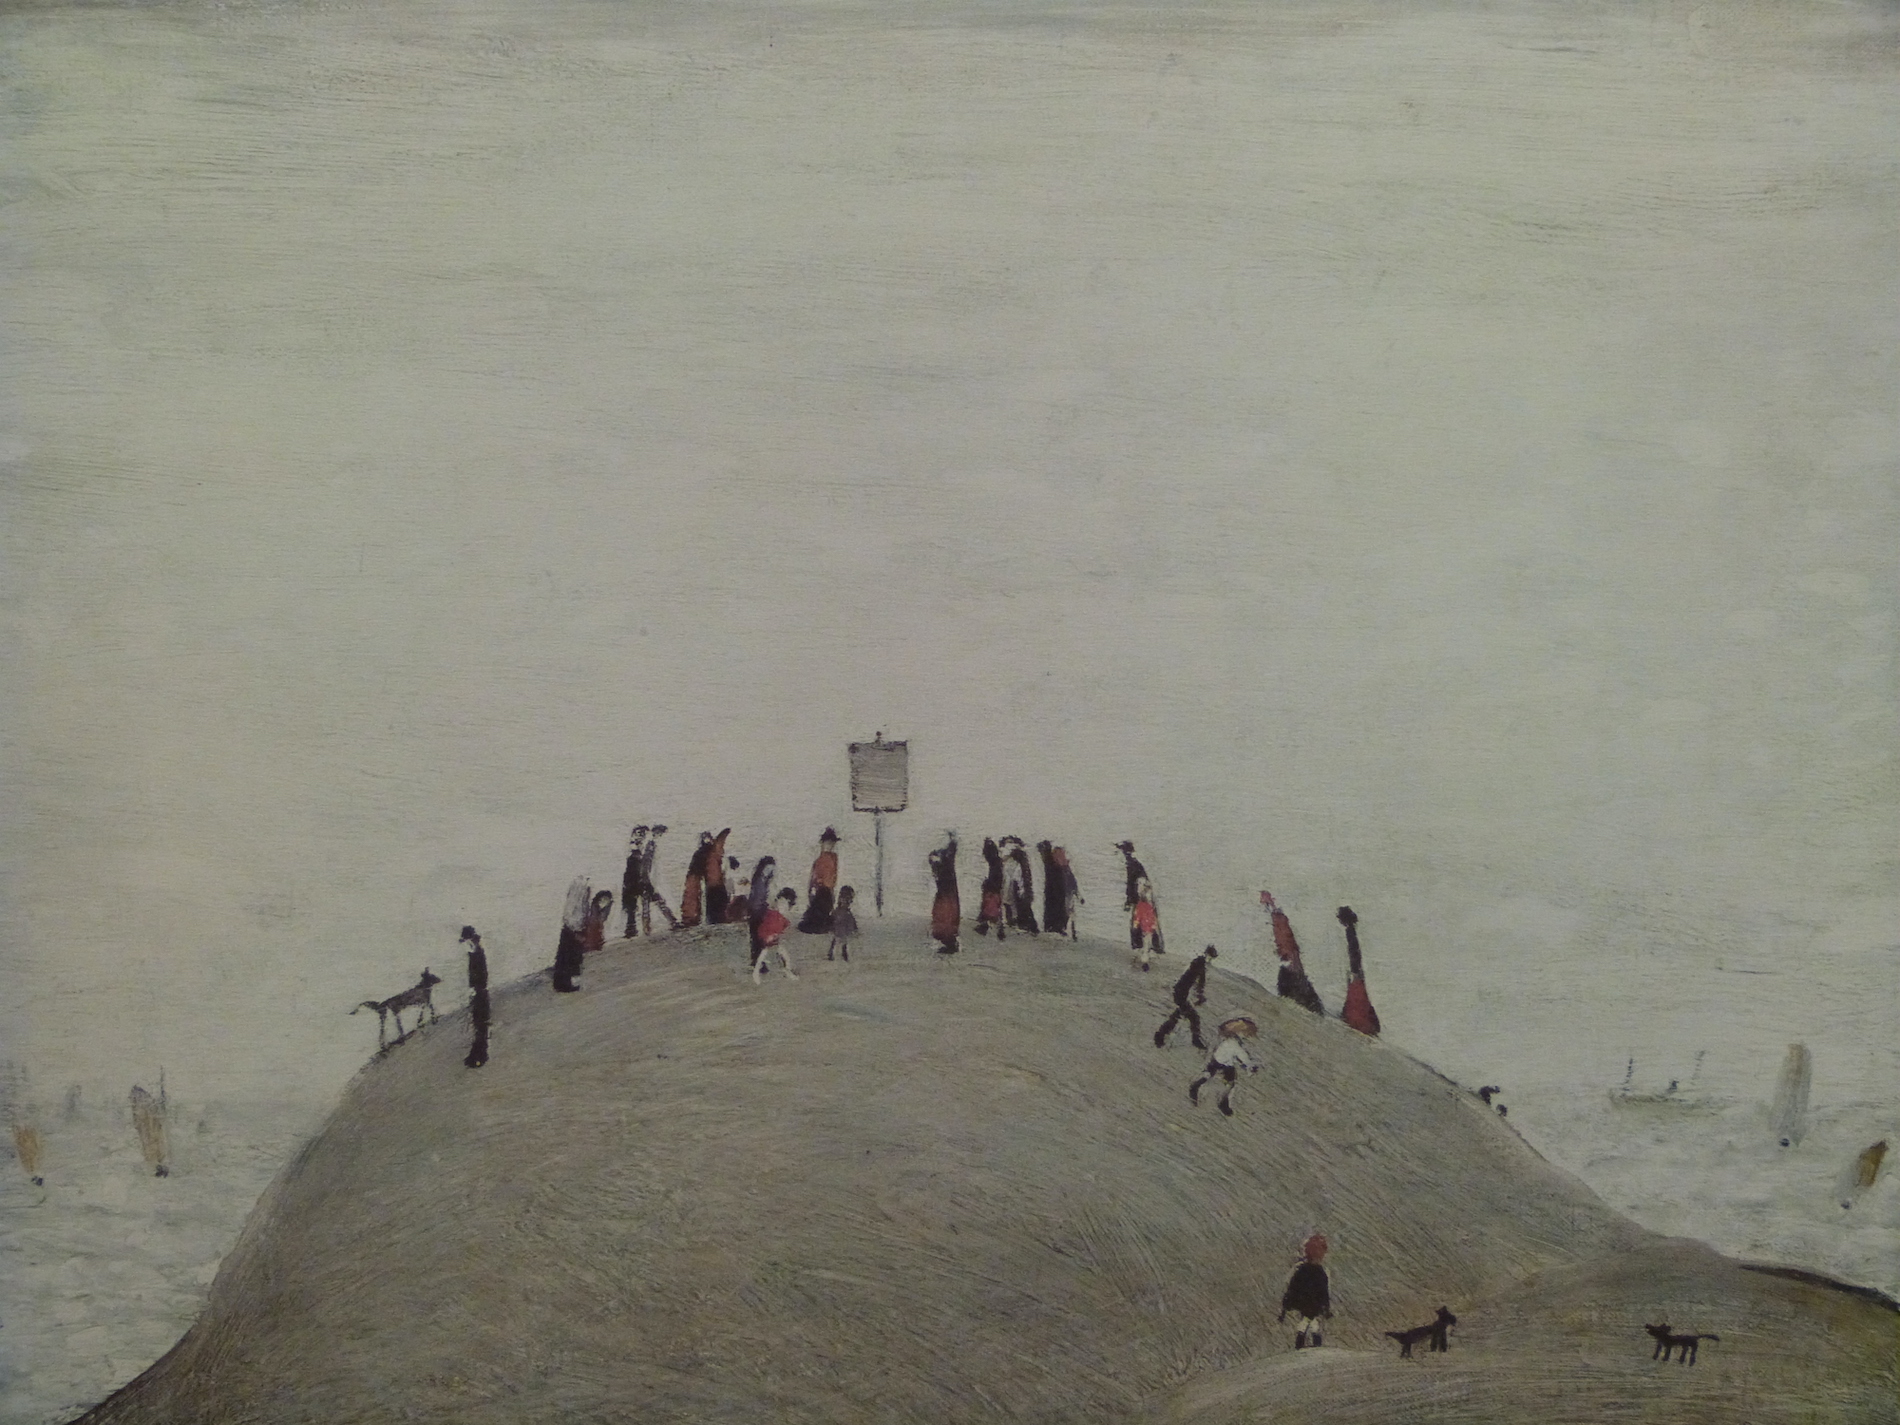 LS Lowry Signed Print 'The Noticeboard' Of A Crowd On A Hill Overlooking The Sea; Blind Stamped Lower Left And Signed In Pencil Lower Right. Sold For Ś1900